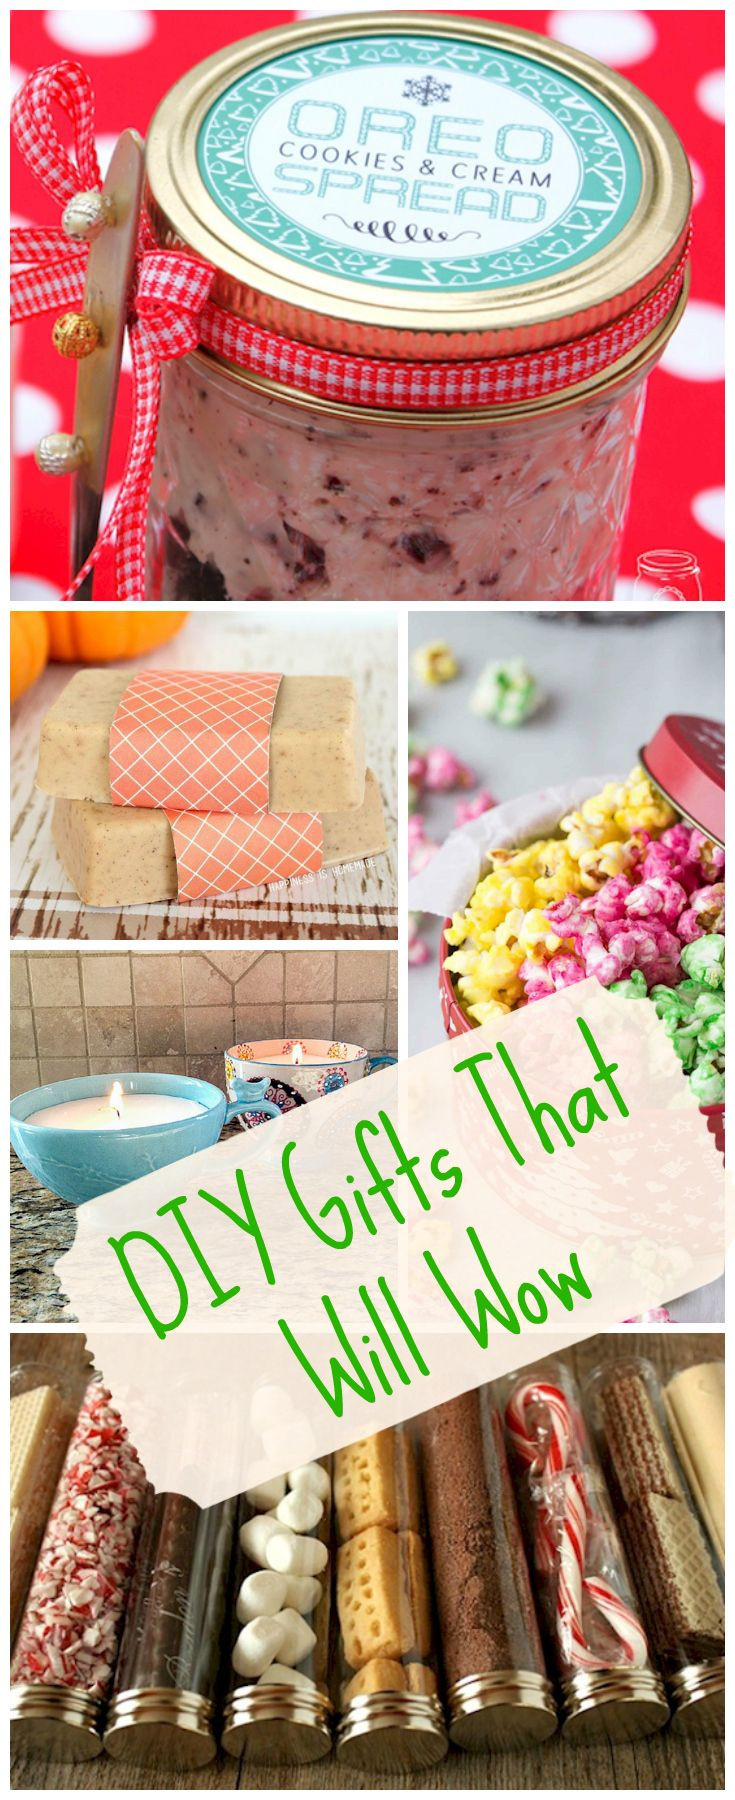 Thank You Gift Ideas For Family
 16 DIY Christmas Gifts With The WOW Factor